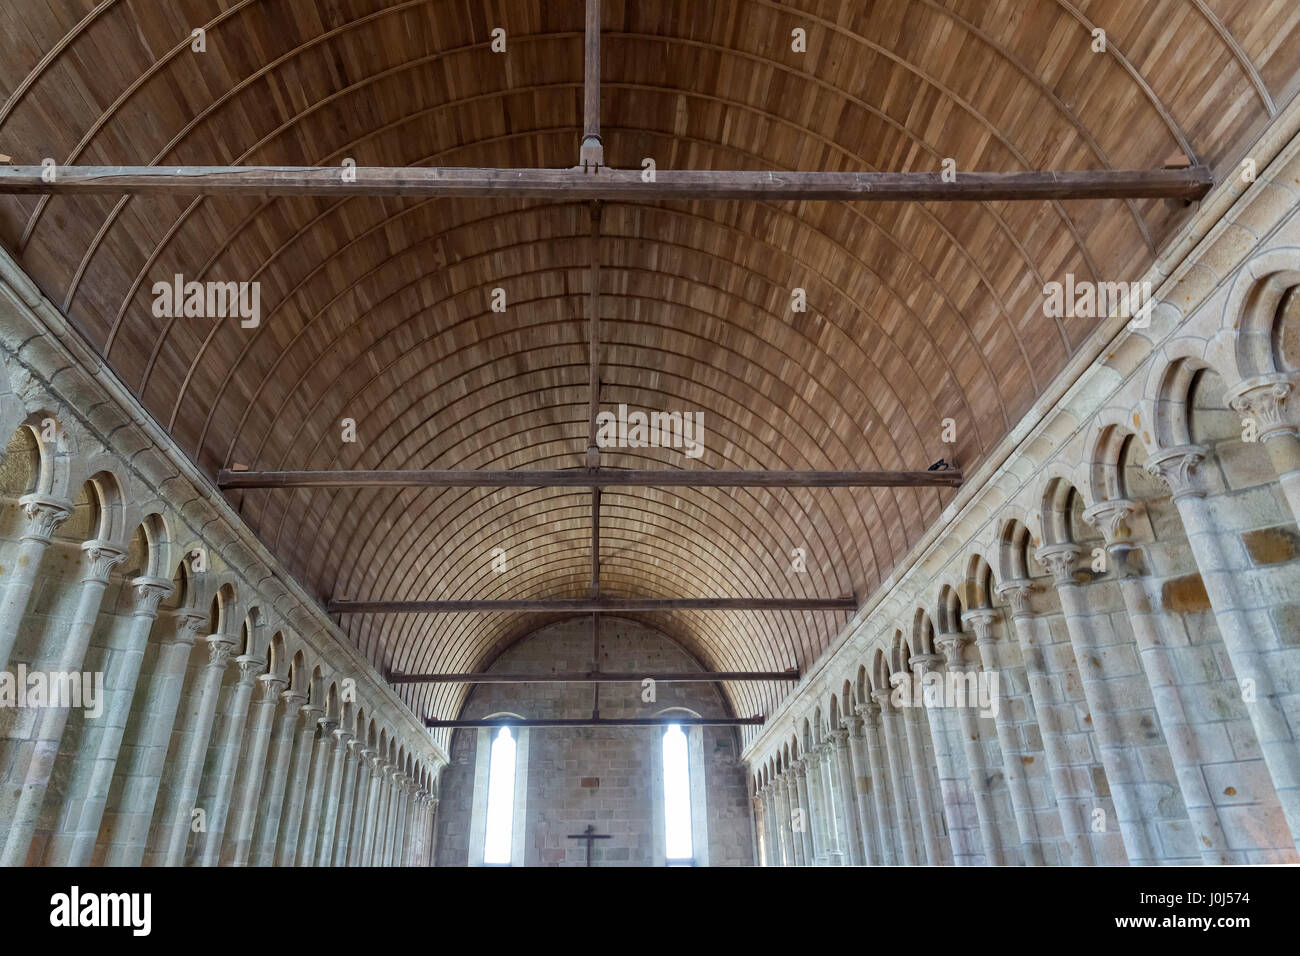 Monks refectory. The medieval Mont-Saint-Michel Abbey on a tidal island and mainland commune in Normandy, in the department of Manche, France. Stock Photo